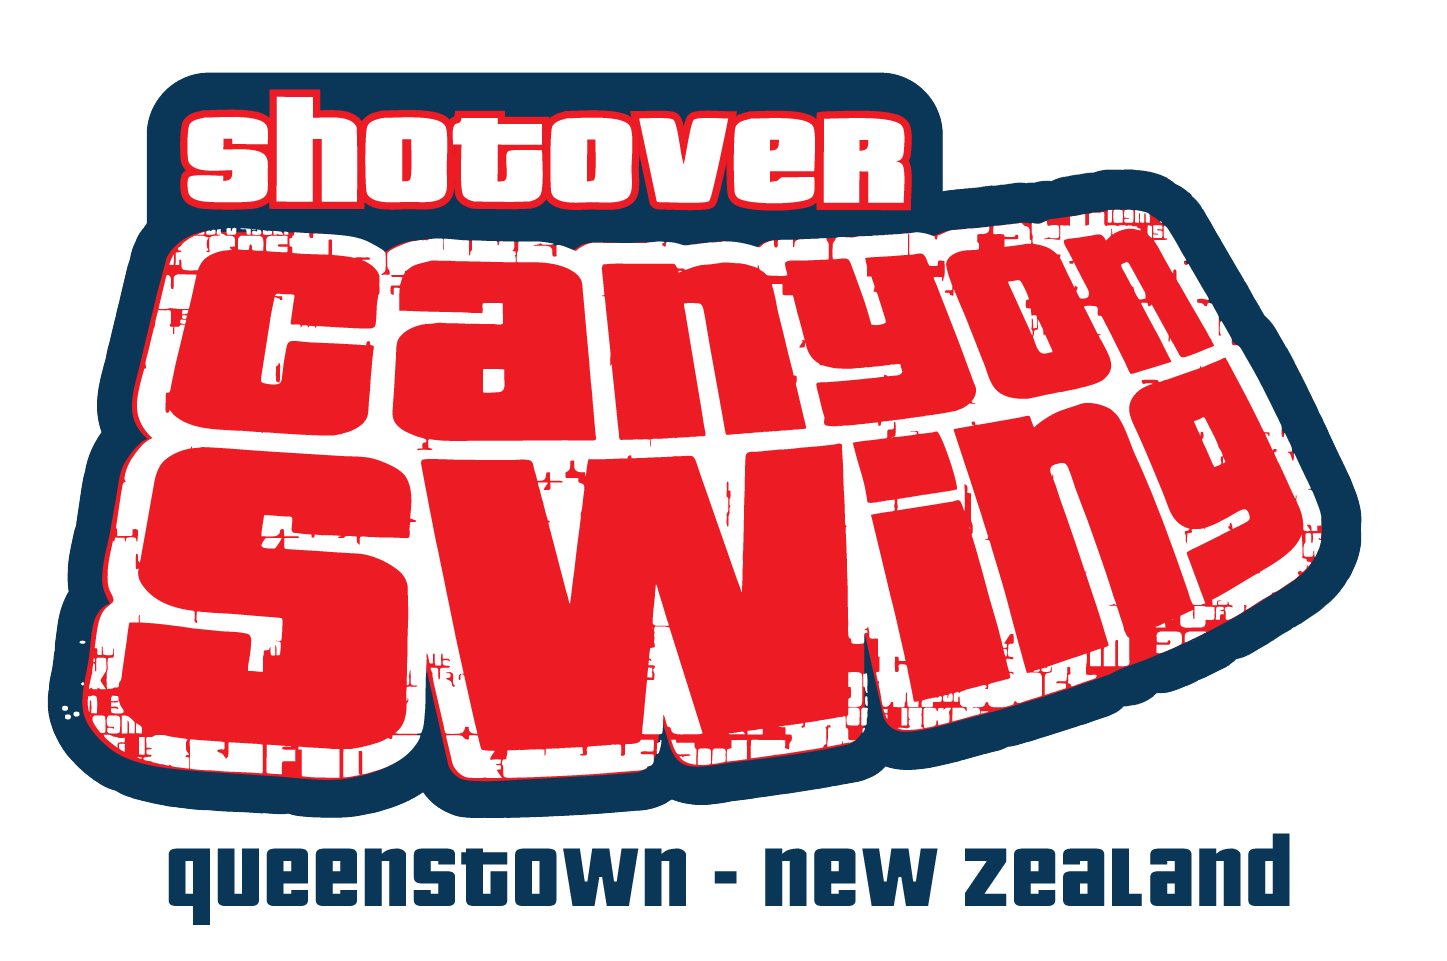 Canyon Swing Queenstown